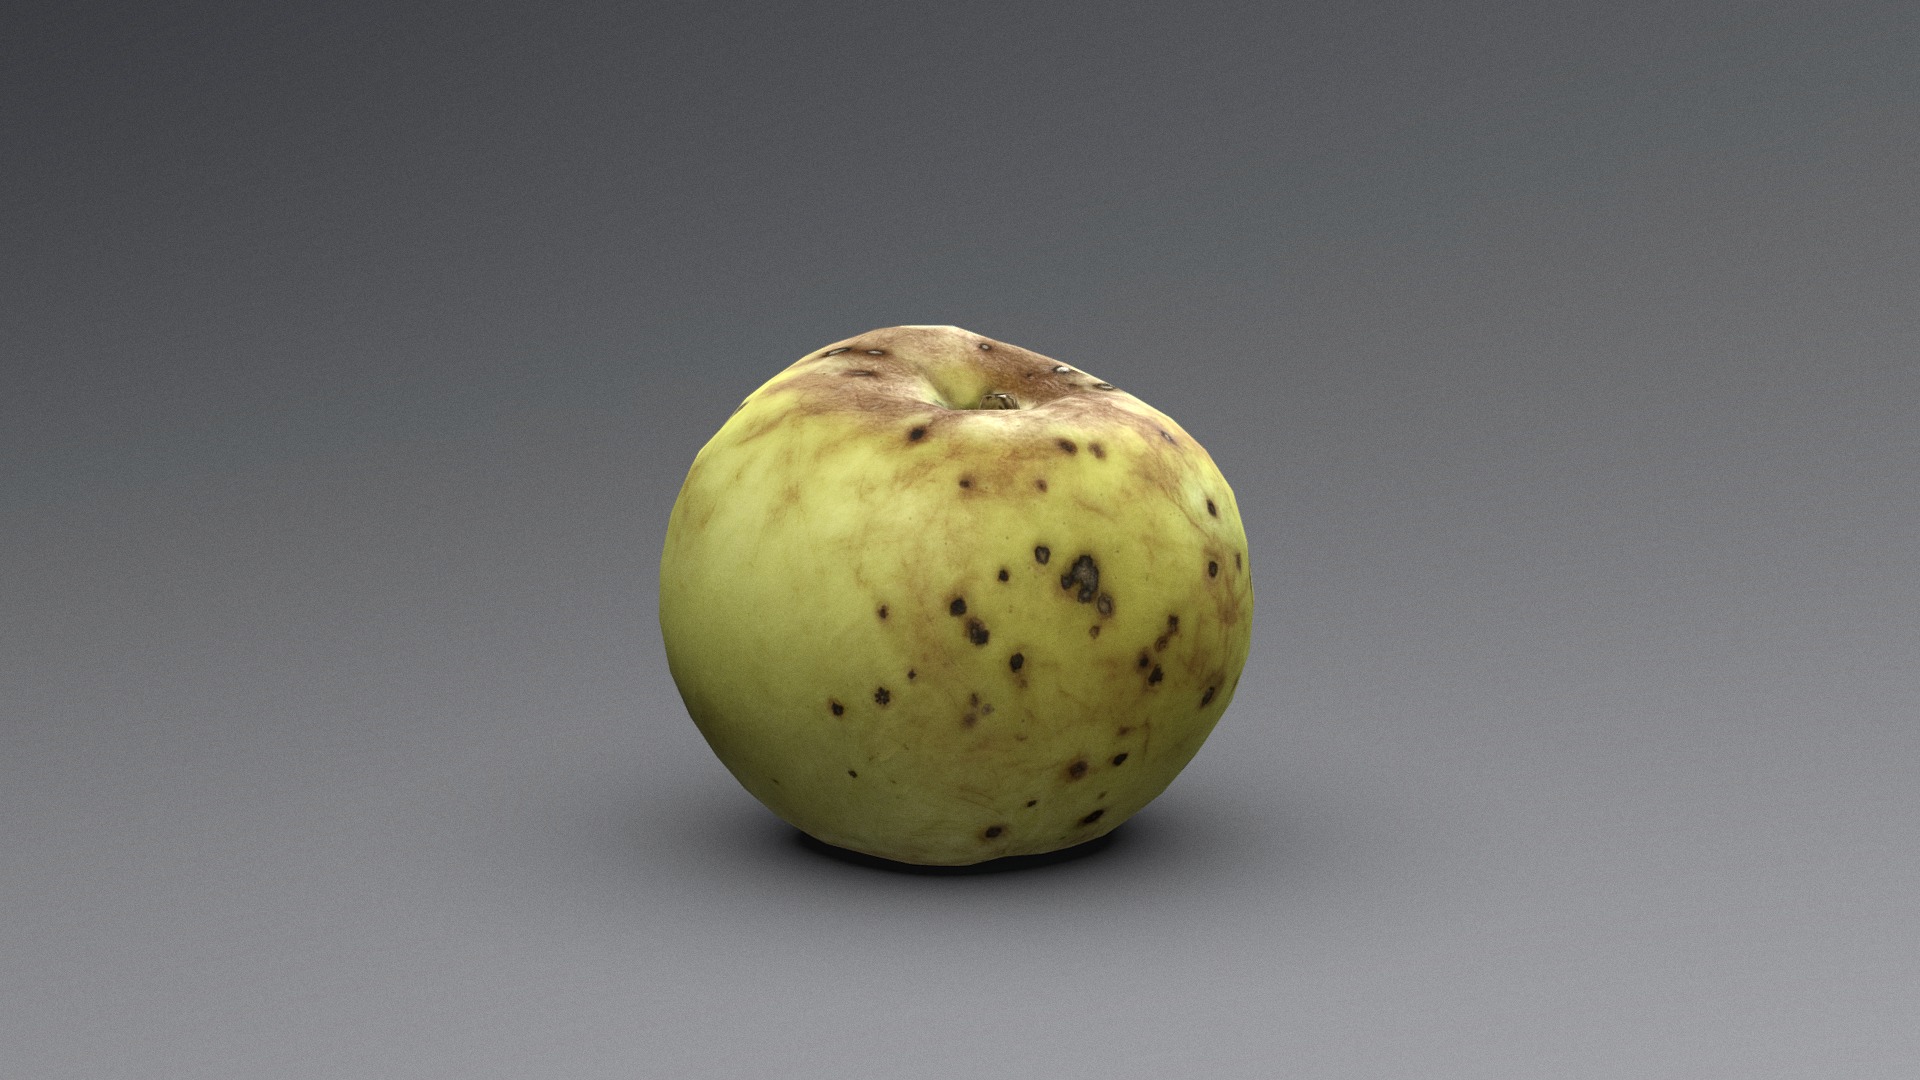 3D model Maschanzker Apple 1 - This is a 3D model of the Maschanzker Apple 1. The 3D model is about a potato with a face on it.